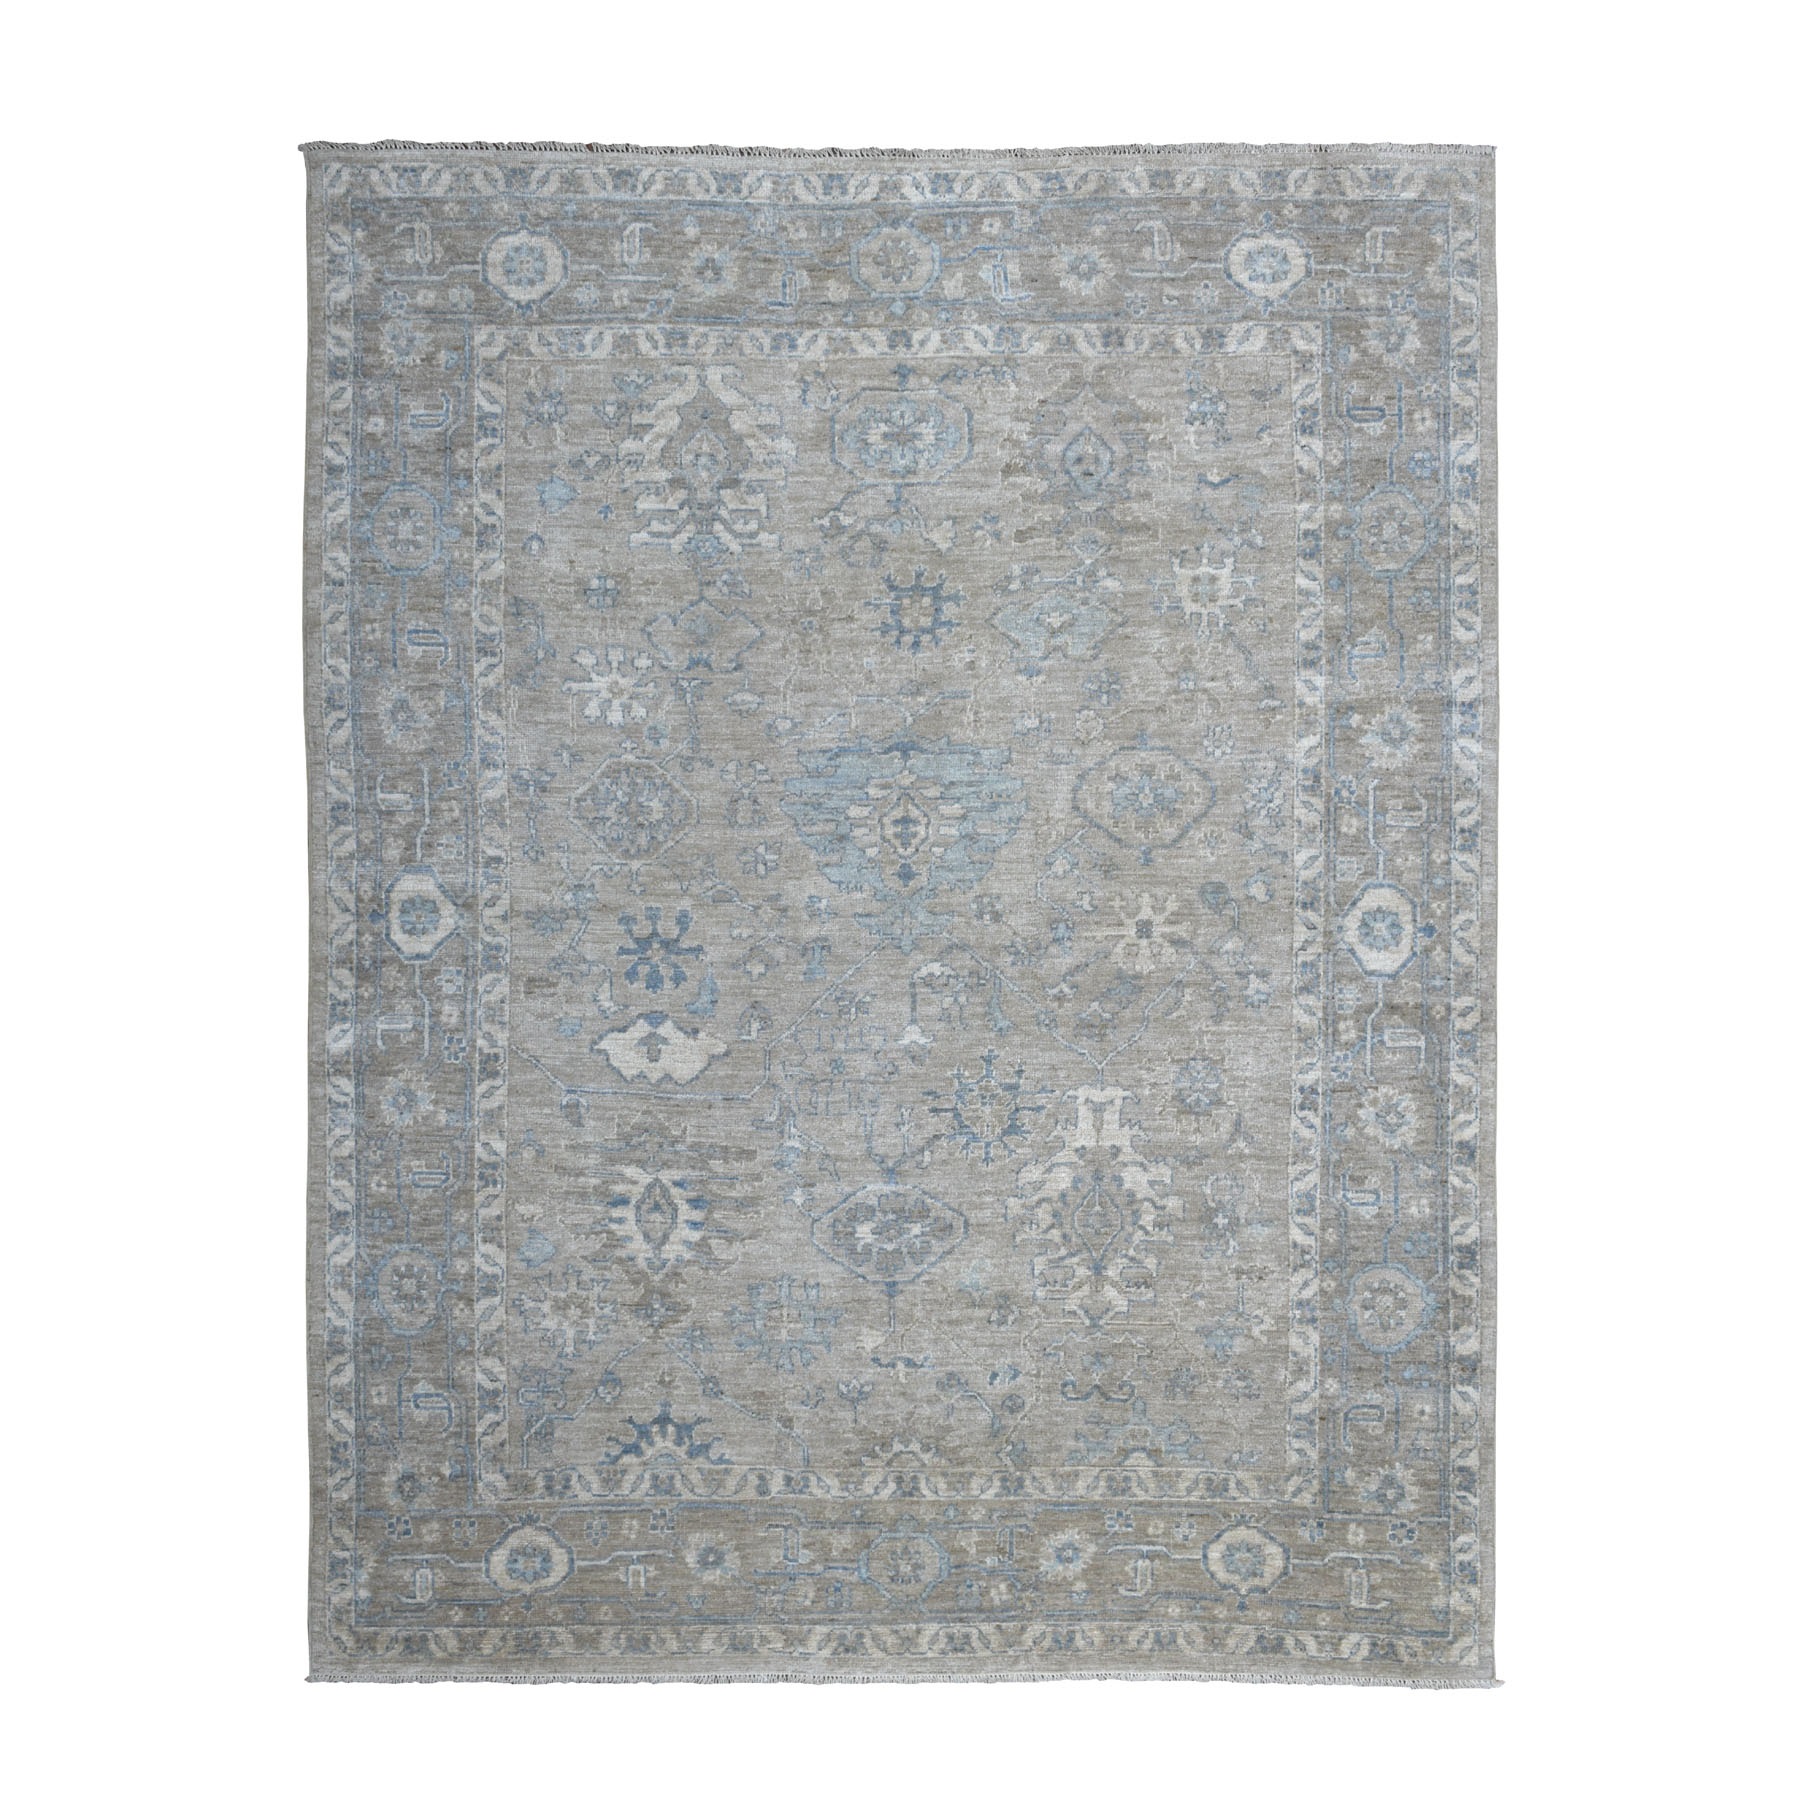 7'7"X10' Gray Angora Oushak With Soft Velvety Wool Hand Knotted Oriental Rug moaedcde